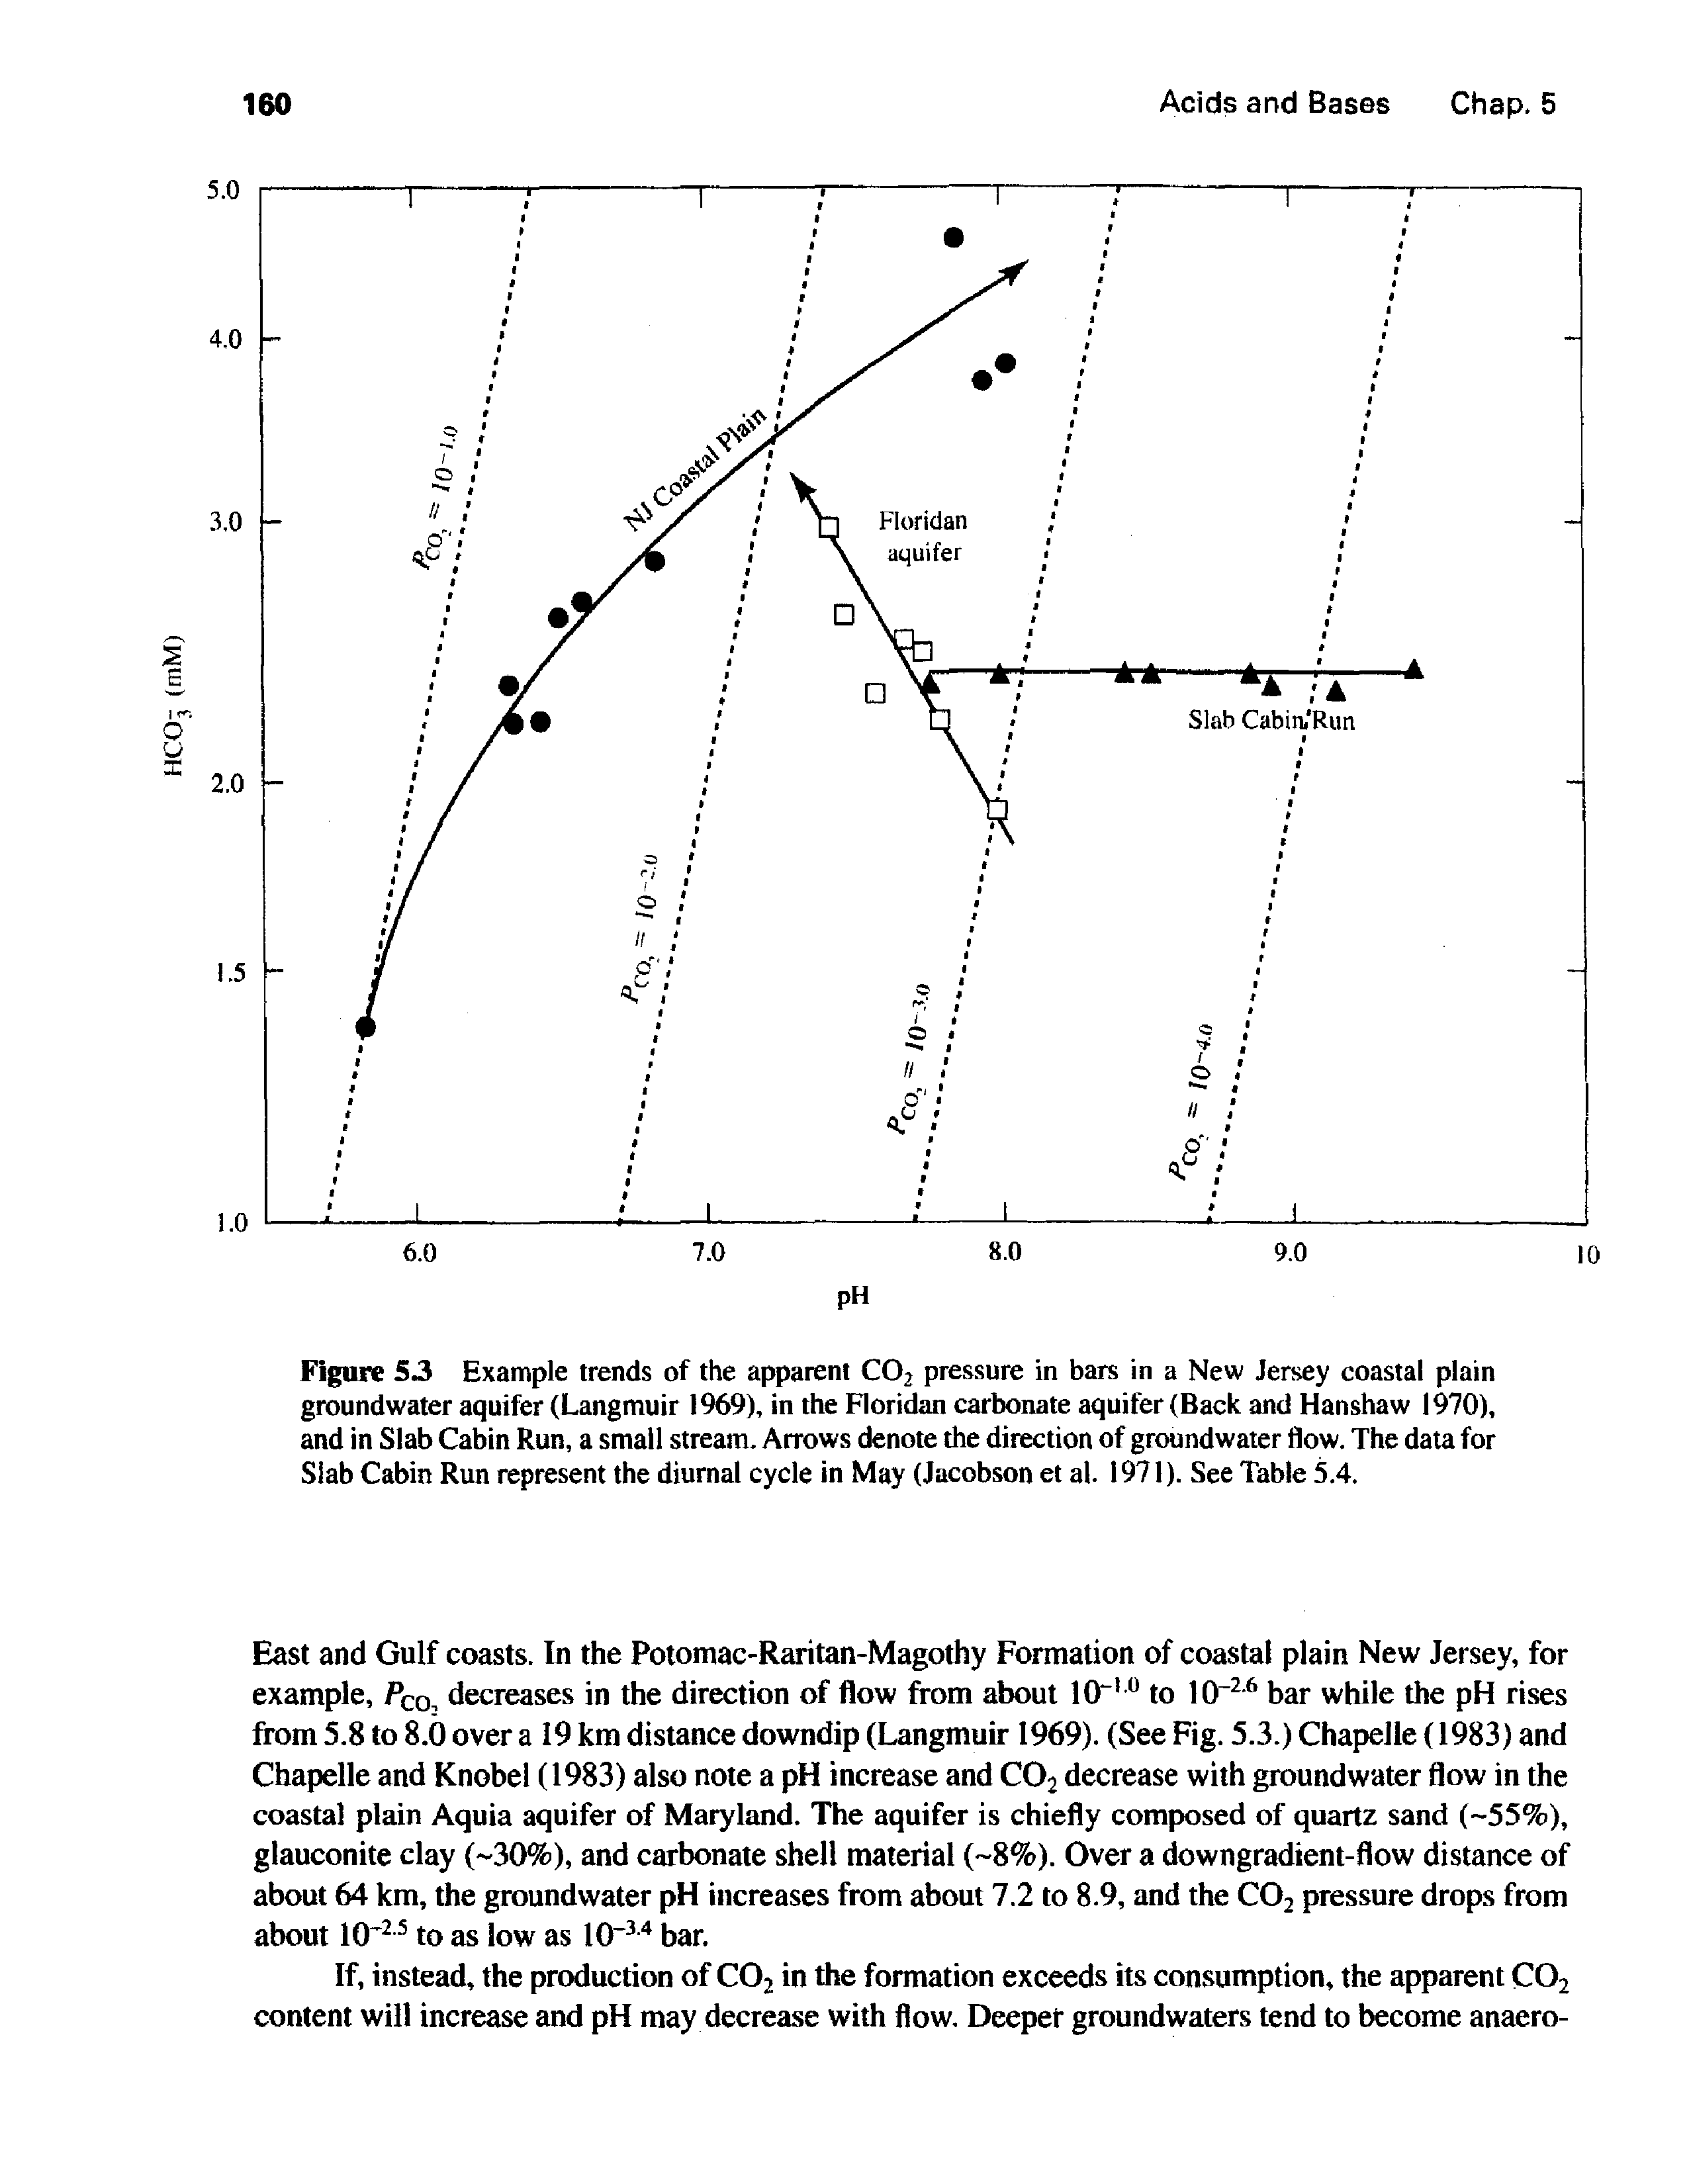 Figure S3 Example trends of the apparent CO2 pressure in bars in a New Jersey coastal plain groundwater aquifer (Langmuir 1969), in the Floridan carbonate aquifer (Back and Hanshaw 1970), and in Slab Cabin Run, a small stream. Arrows denote the direction of groundwater flow. The data for Slab Cabin Run represent the diurnal cycle in May (Jacobson et al. 1971). See Table 5.4.